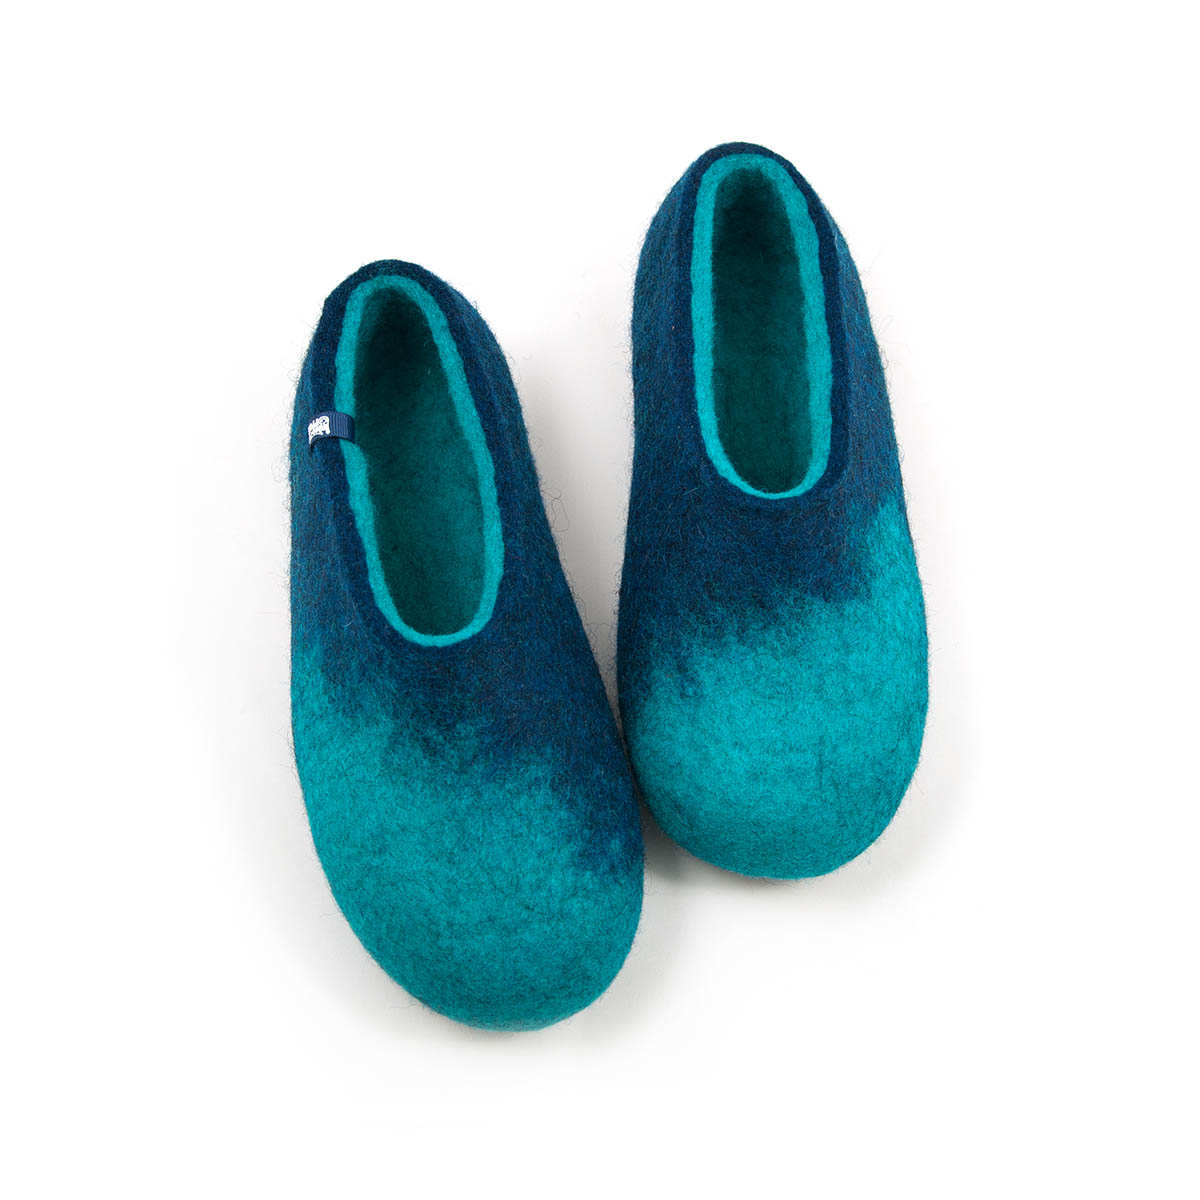 AMIGOS turquoise blue slippers